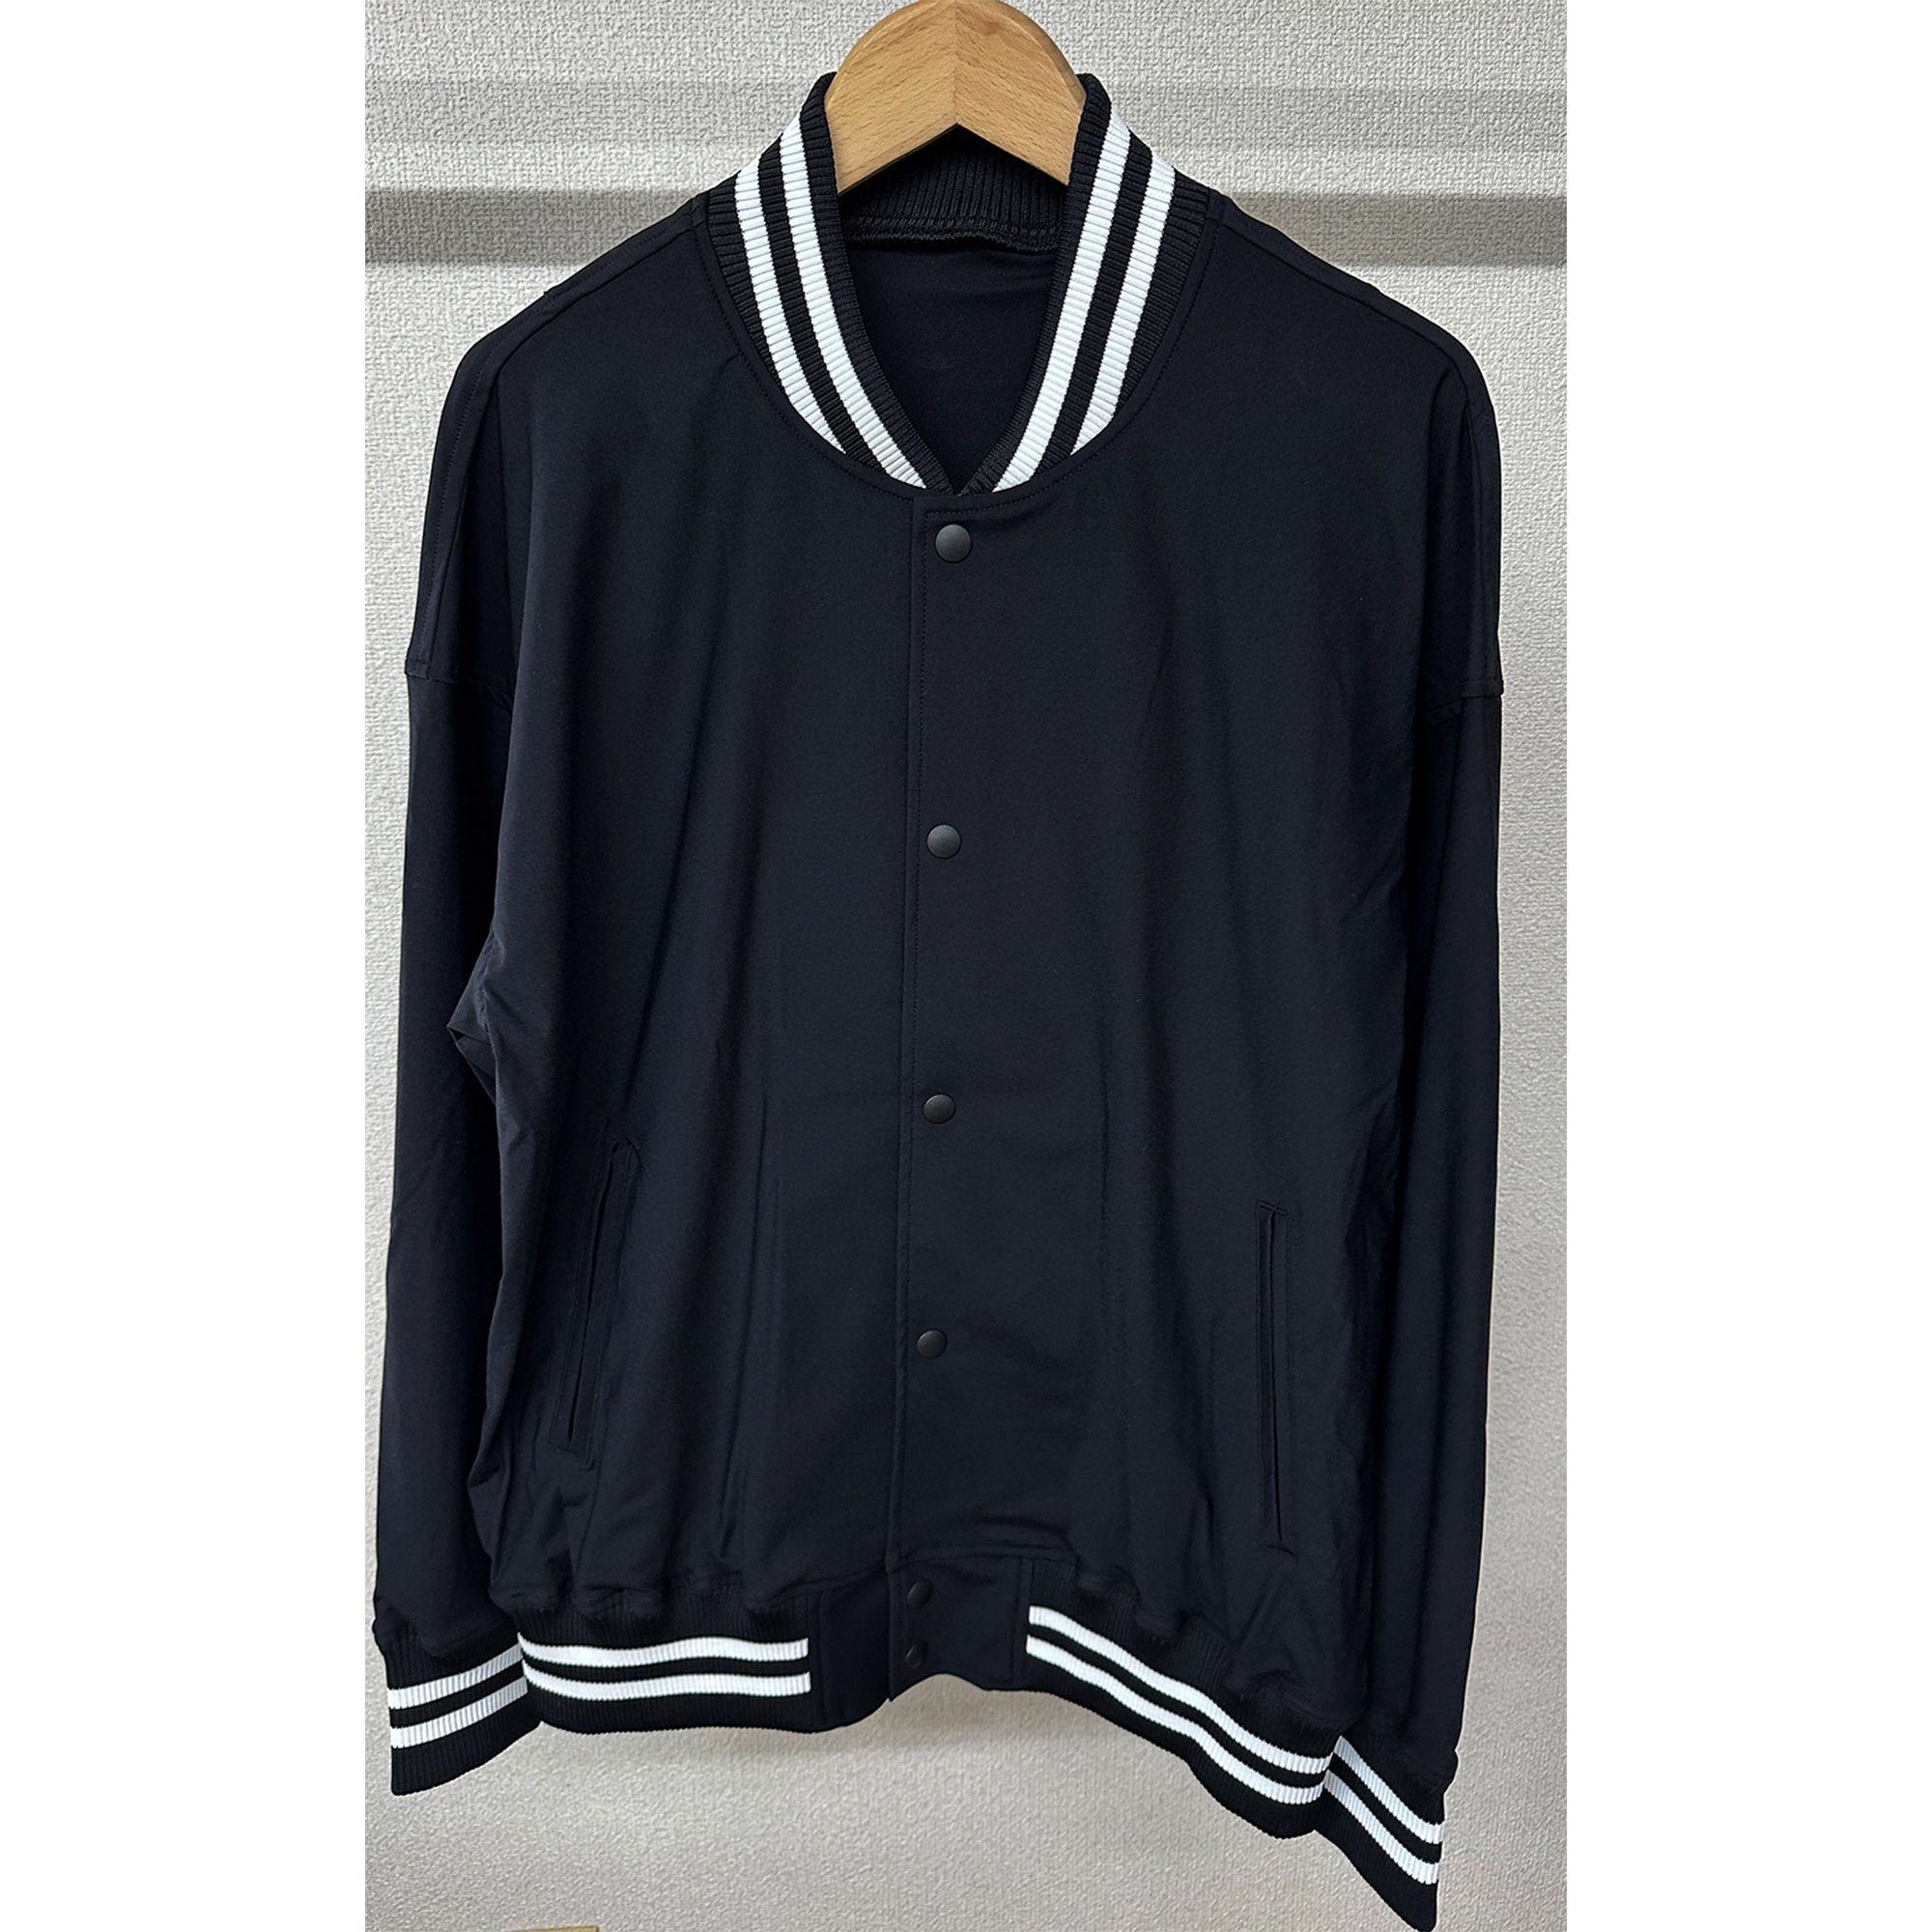 <img class='new_mark_img1' src='https://img.shop-pro.jp/img/new/icons1.gif' style='border:none;display:inline;margin:0px;padding:0px;width:auto;' />TECH OVER VARSITY JACKET BLACK